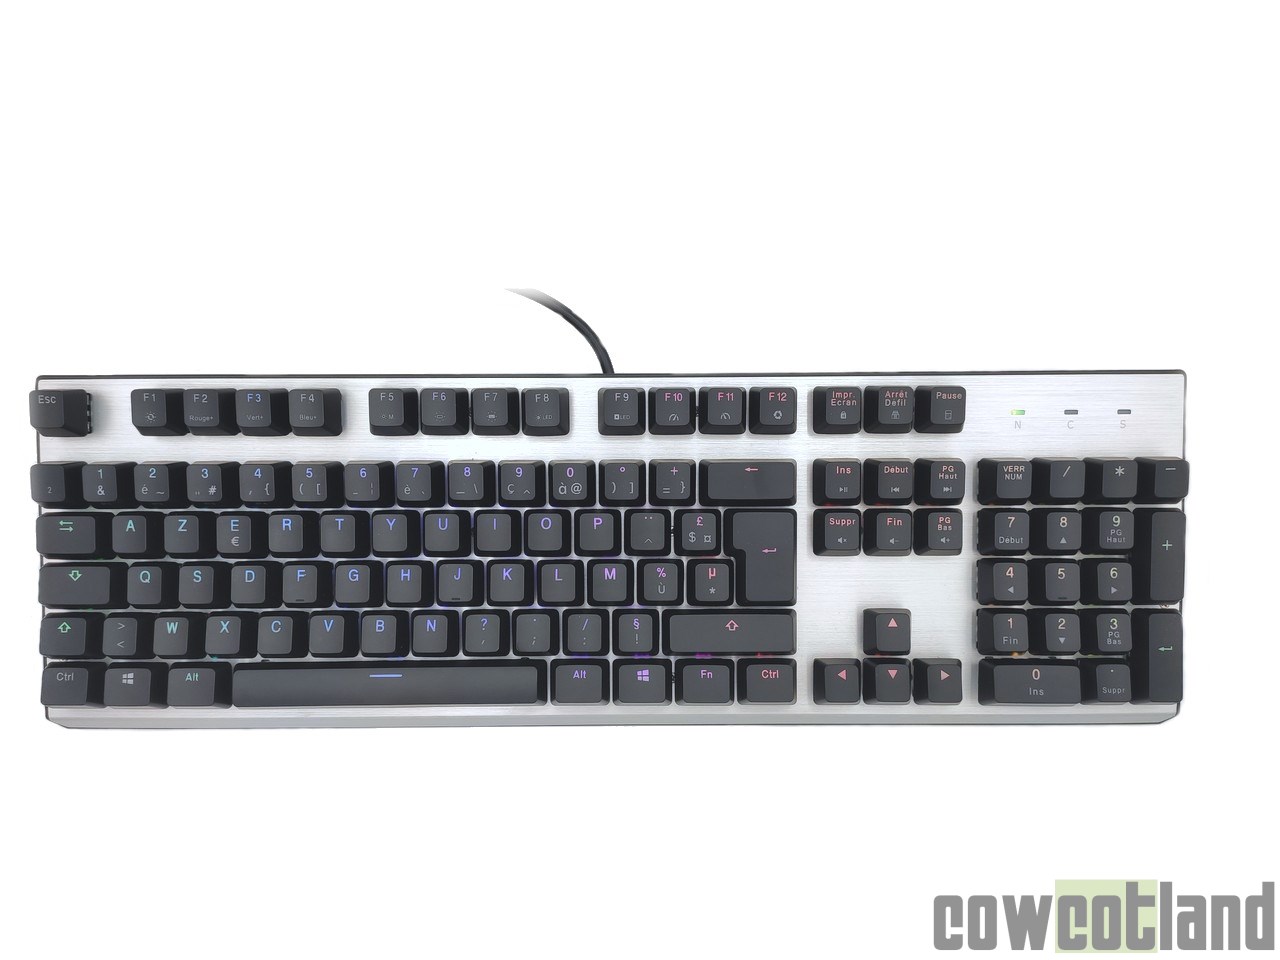 Image 46353, galerie Test clavier mcanique Cooler Master CK351 : switches optiques et hot-swappables !